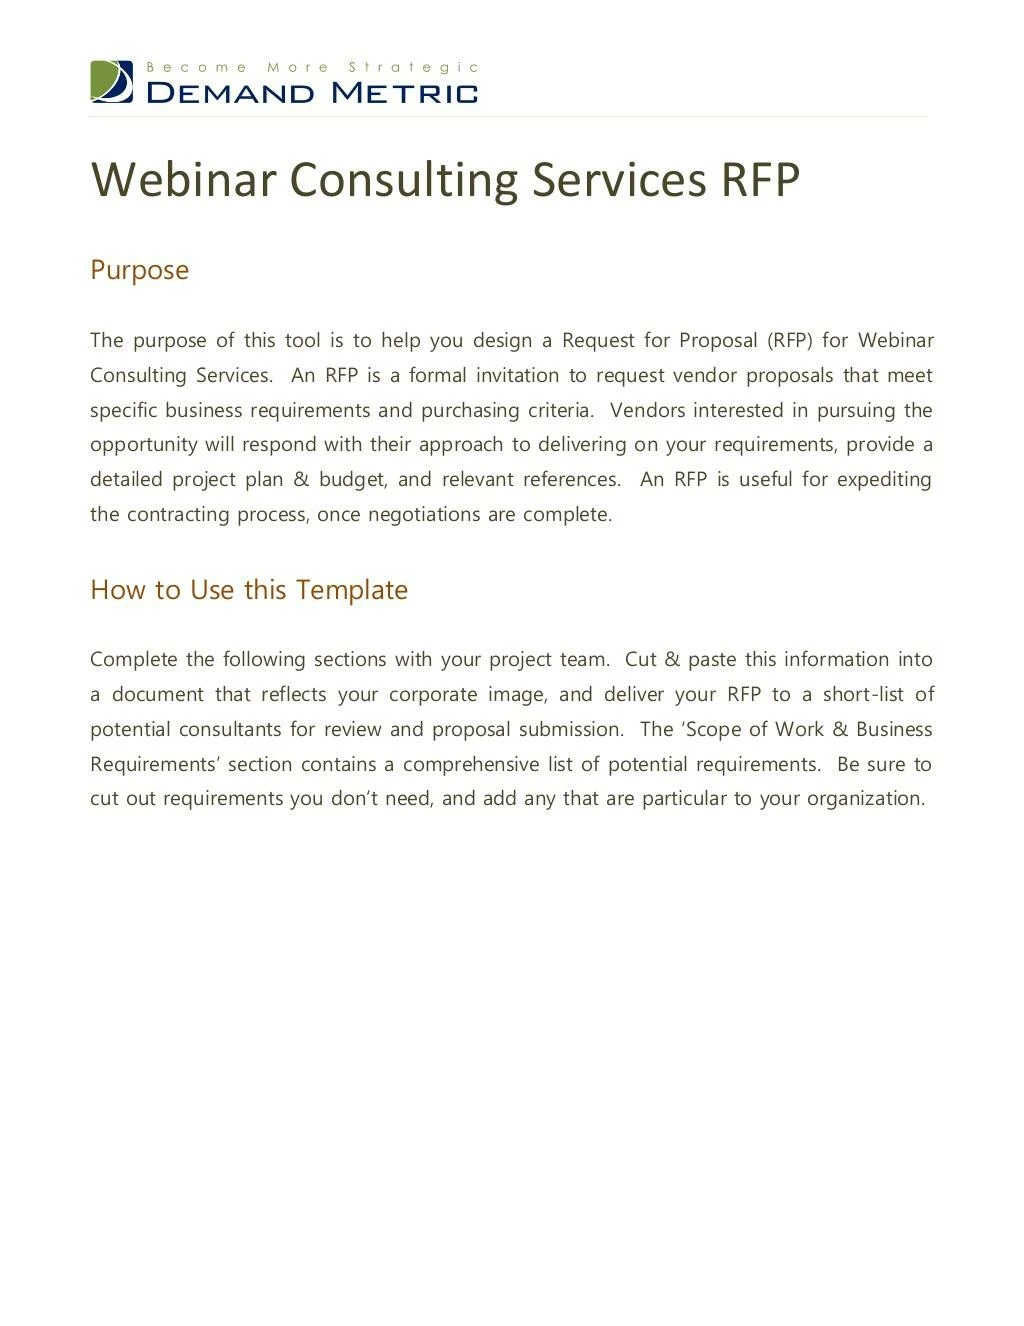 webinar consulting services rfp